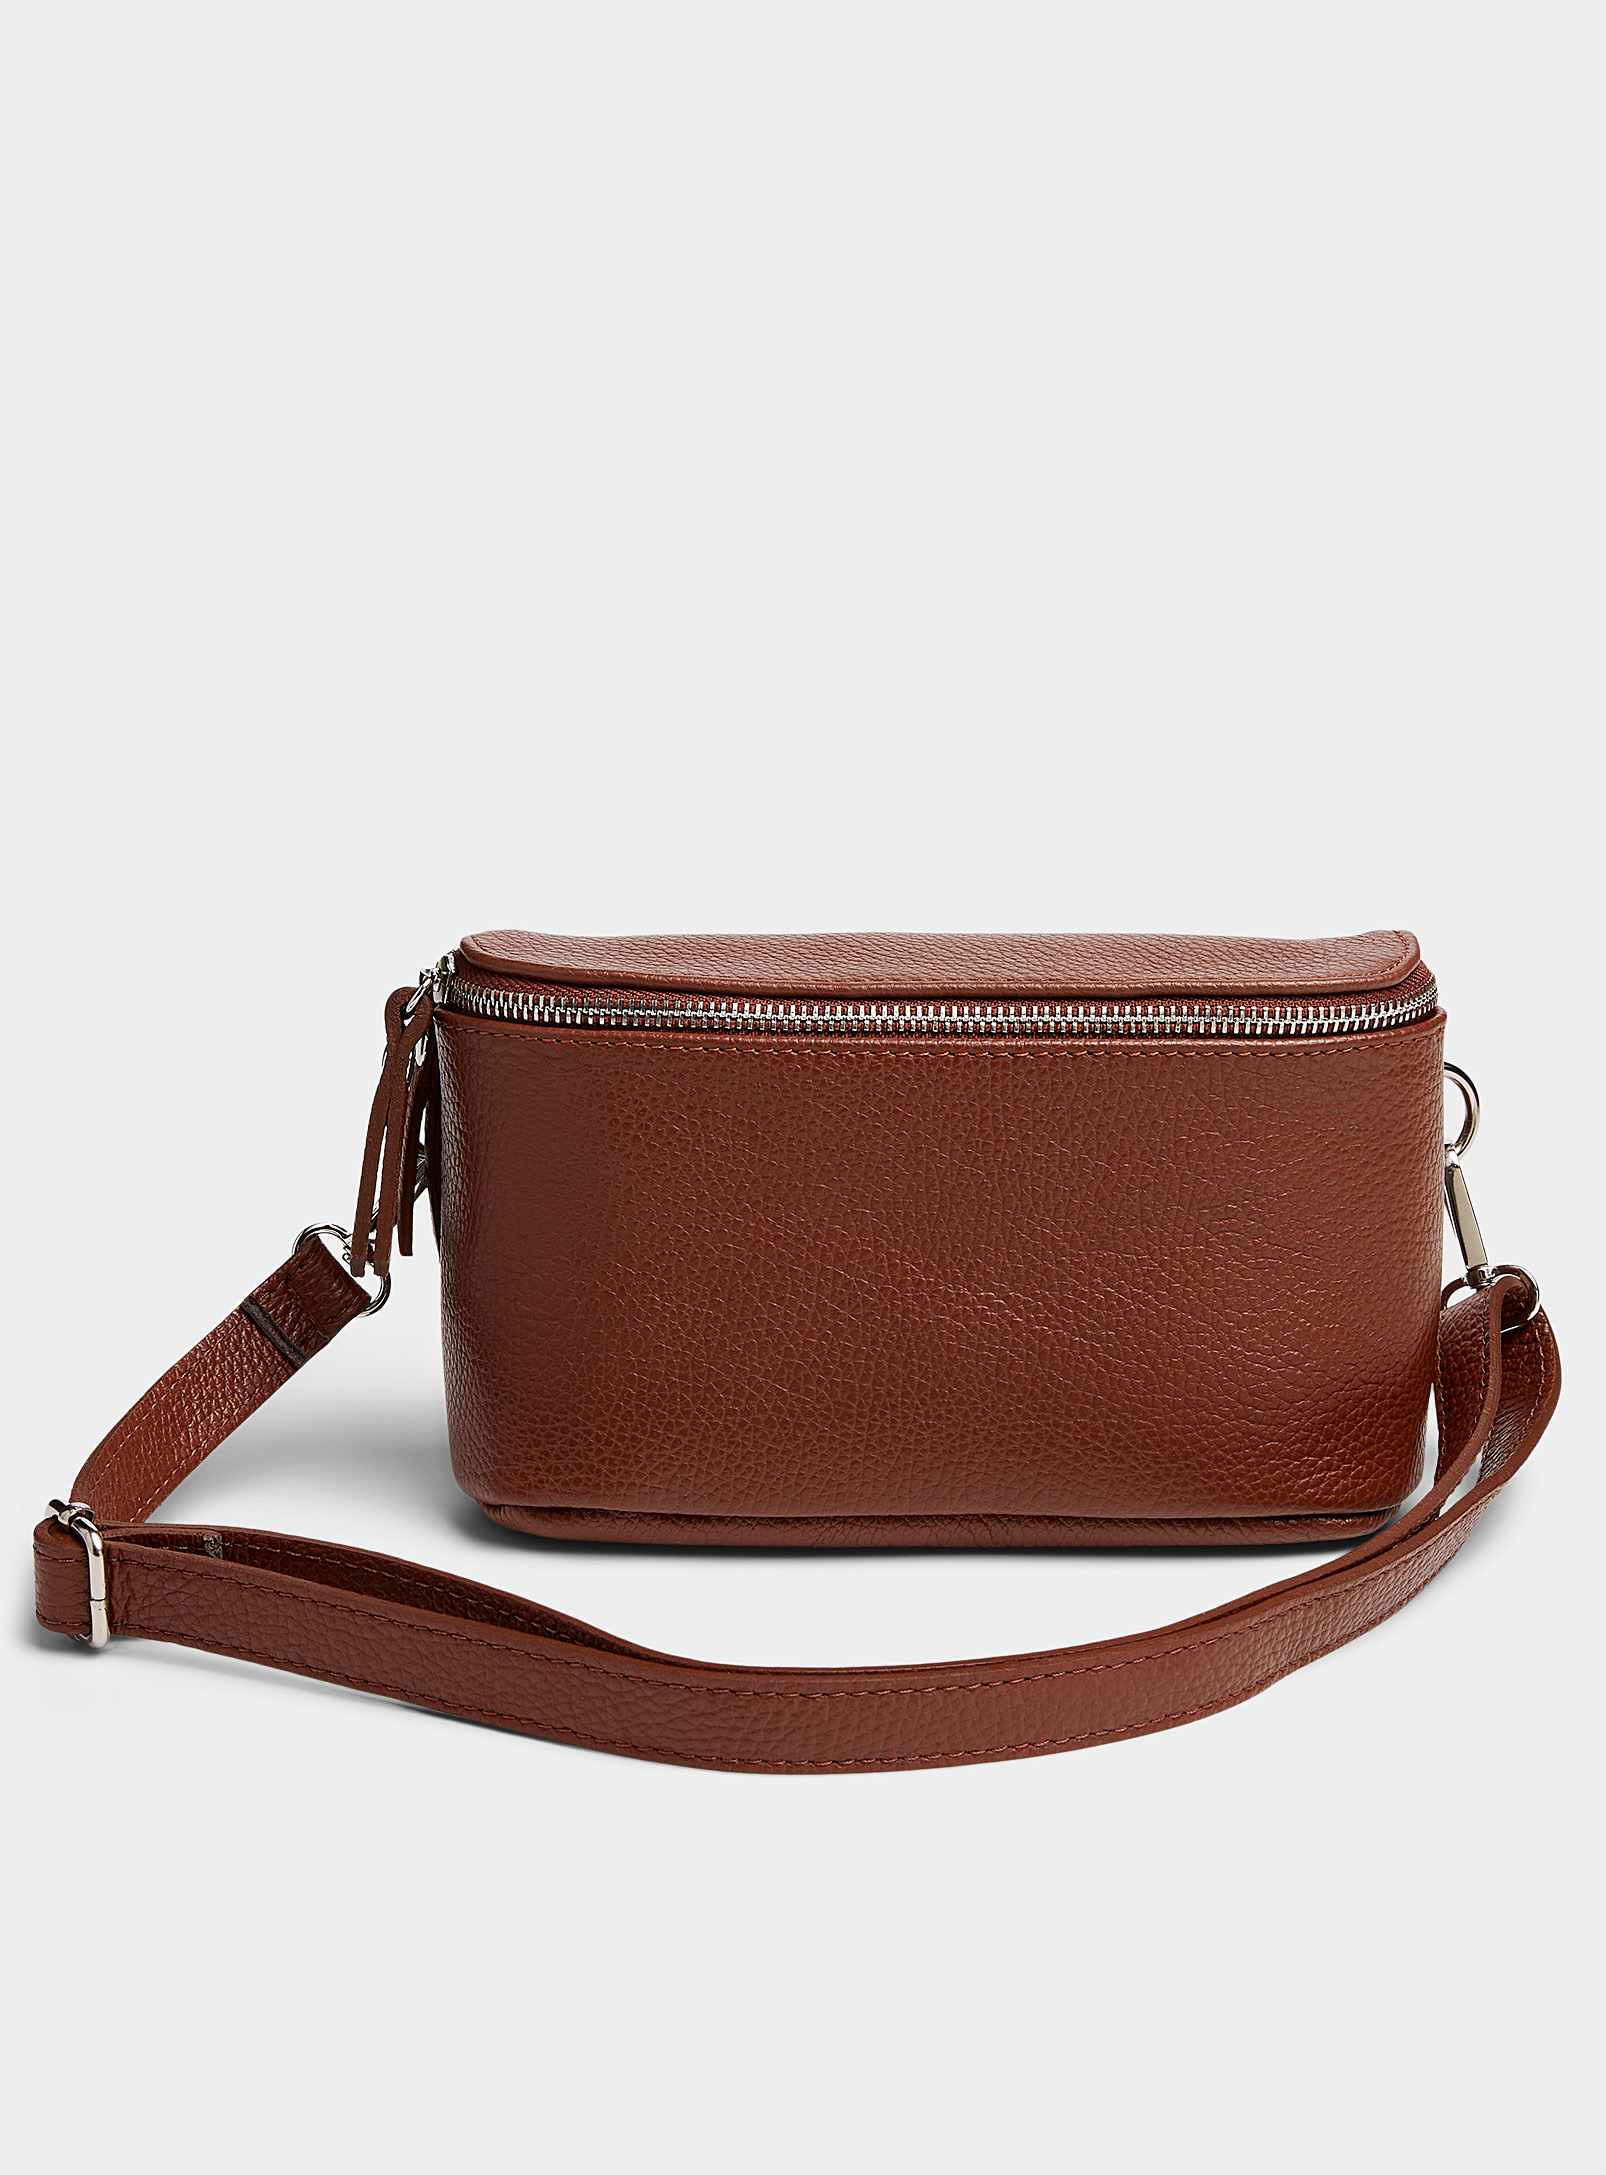 Le 31 Grained Leather Shoulder Bag In Brown